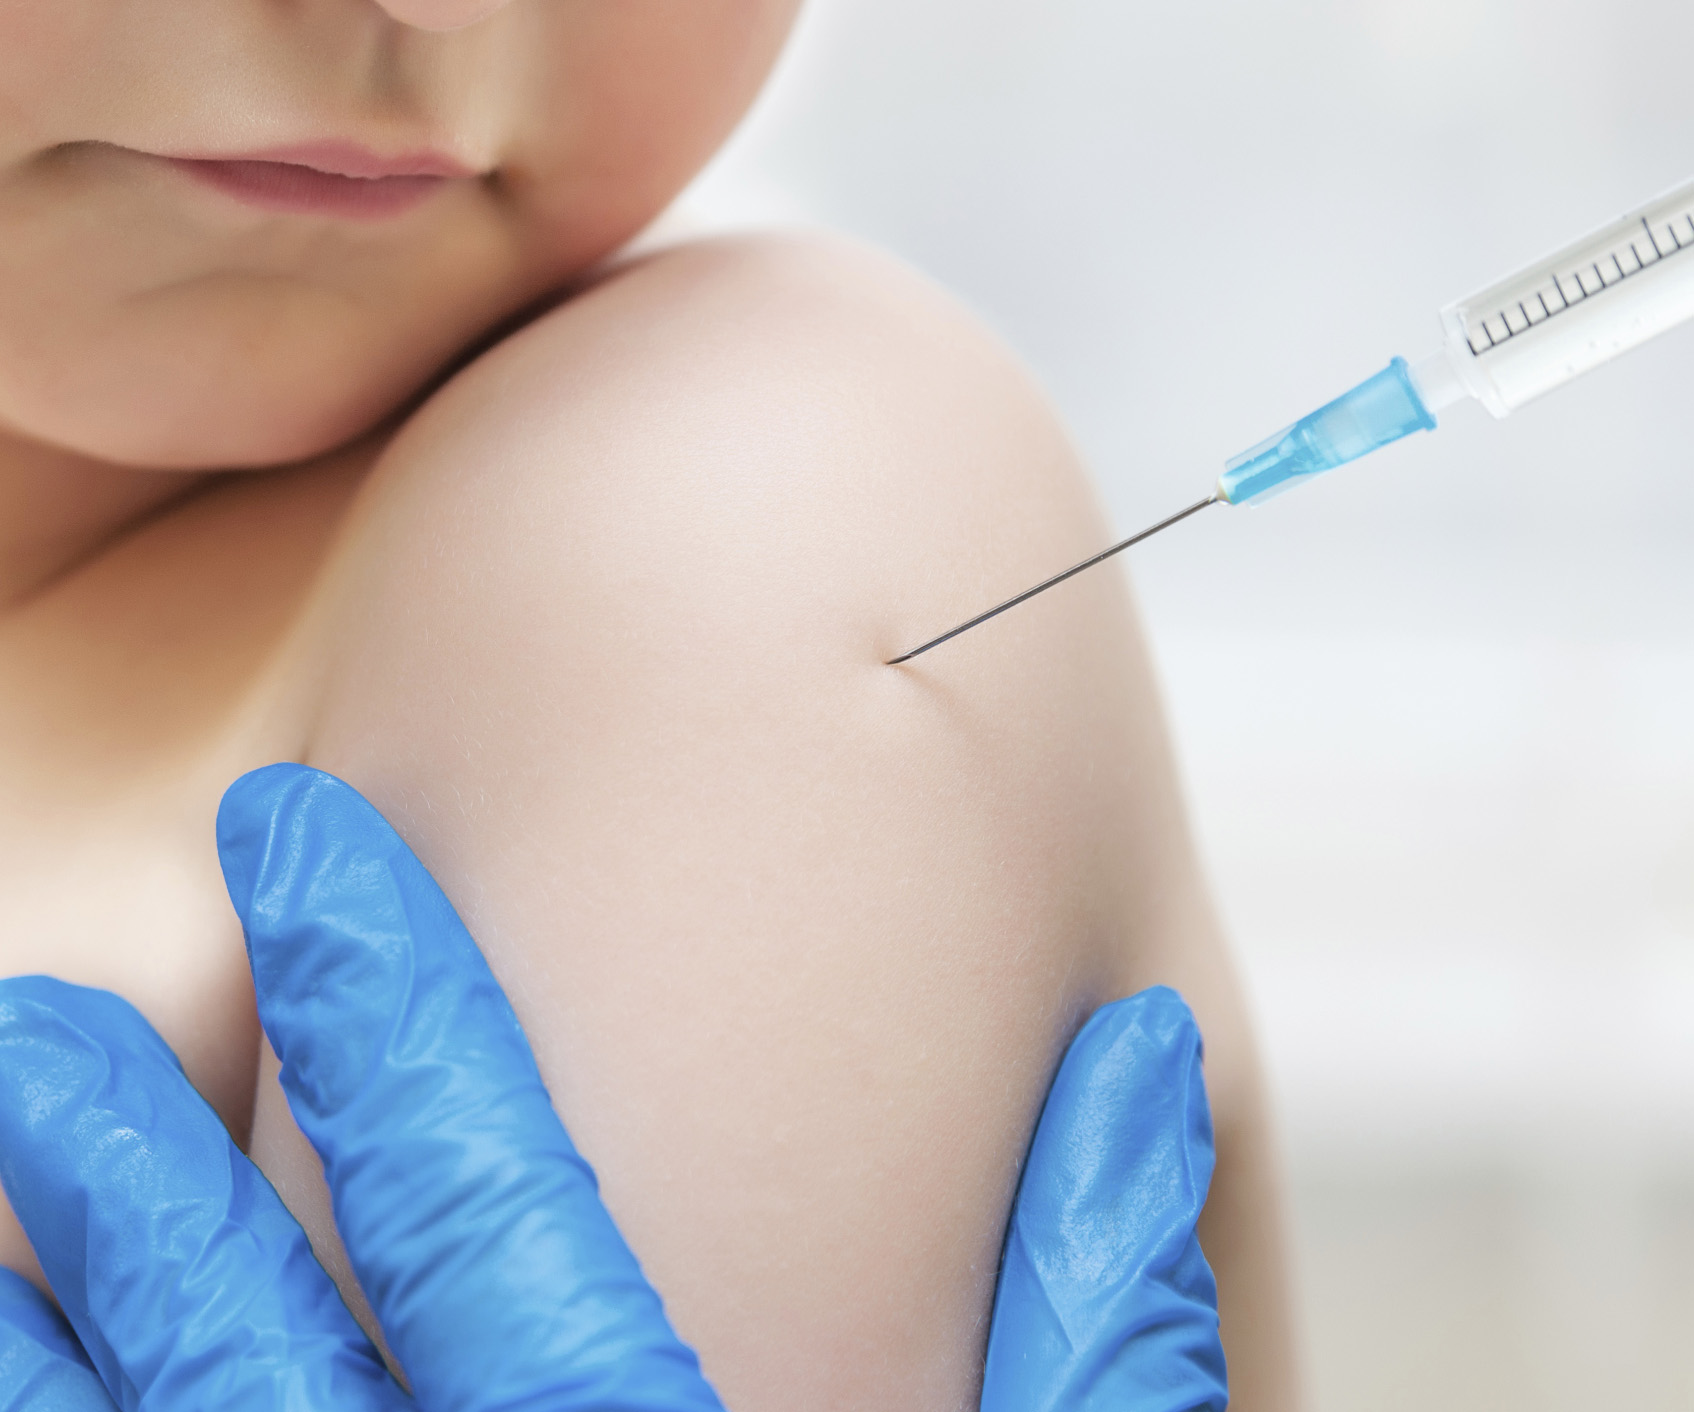 Melbourne Zoo anti-vax event sparks concern